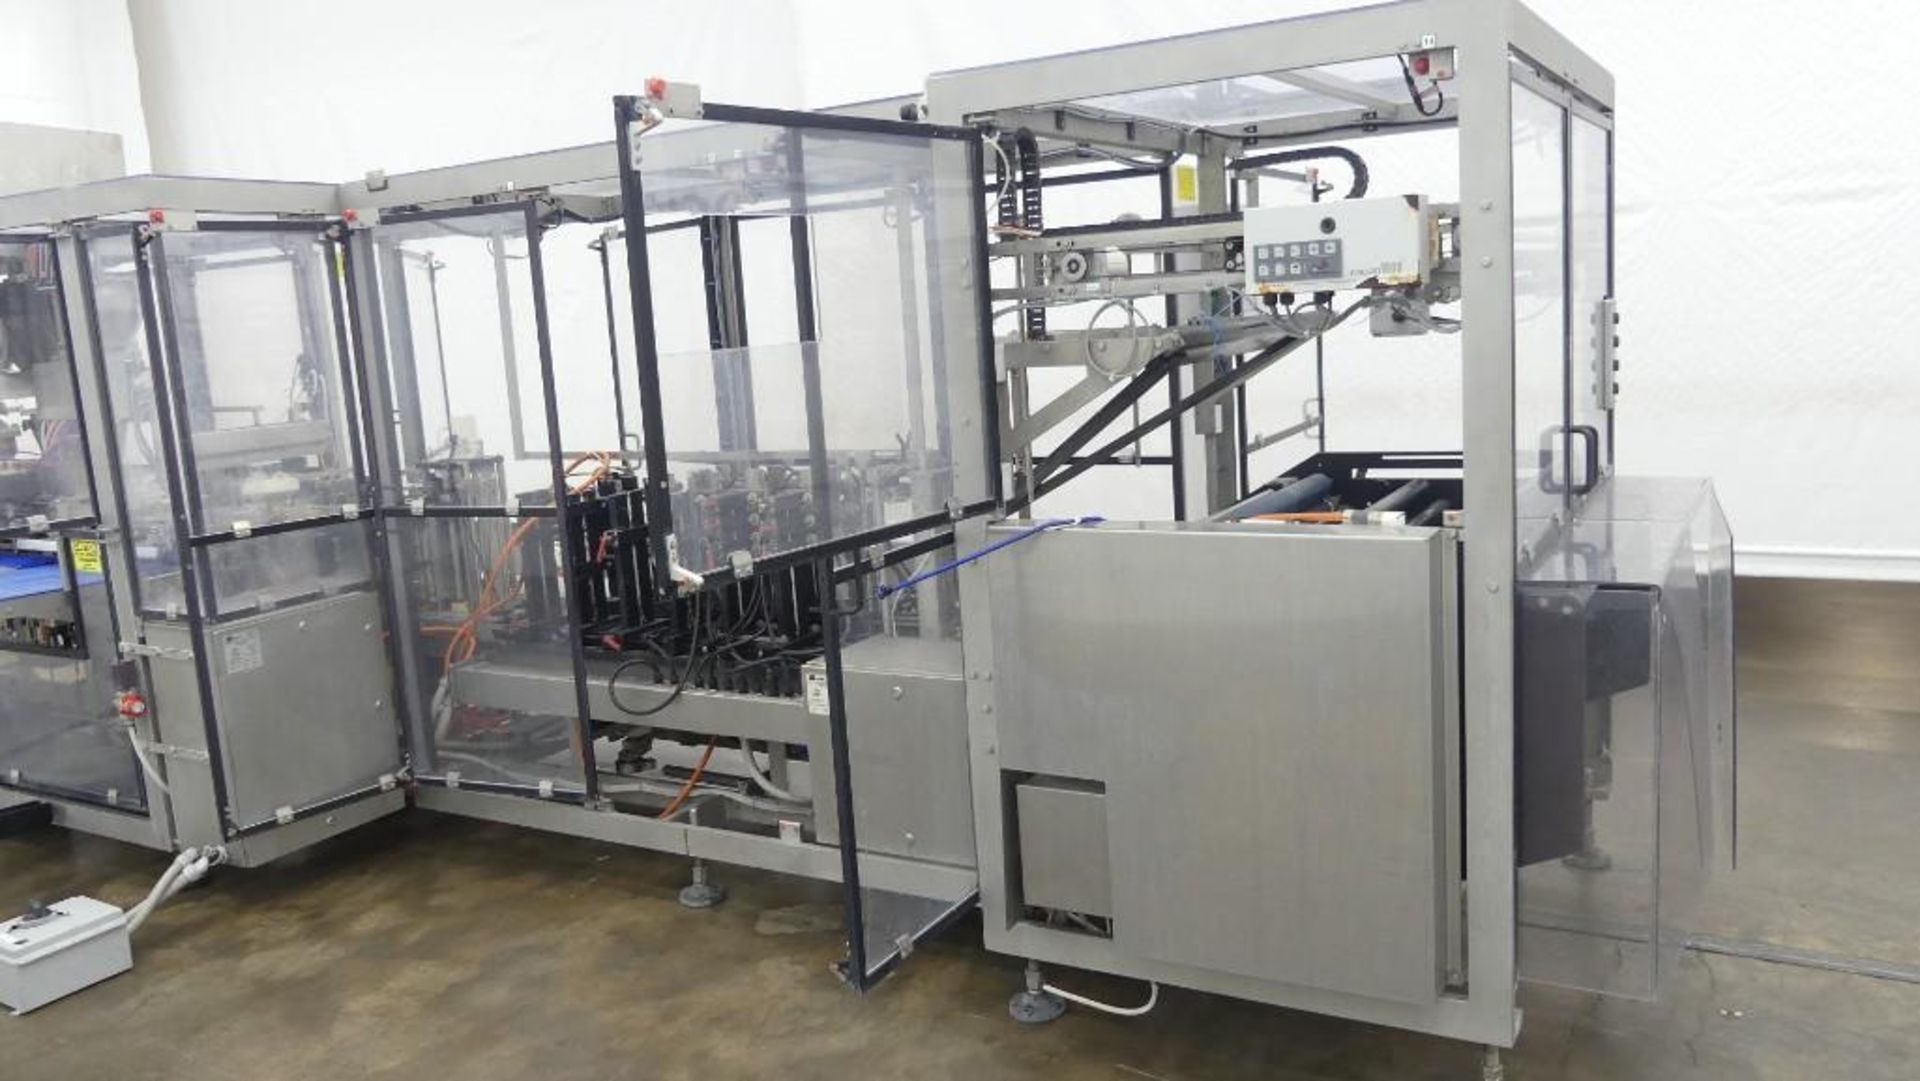 Massman HFFS-IM0800 Flexible Pouch Packaging System - Image 15 of 29